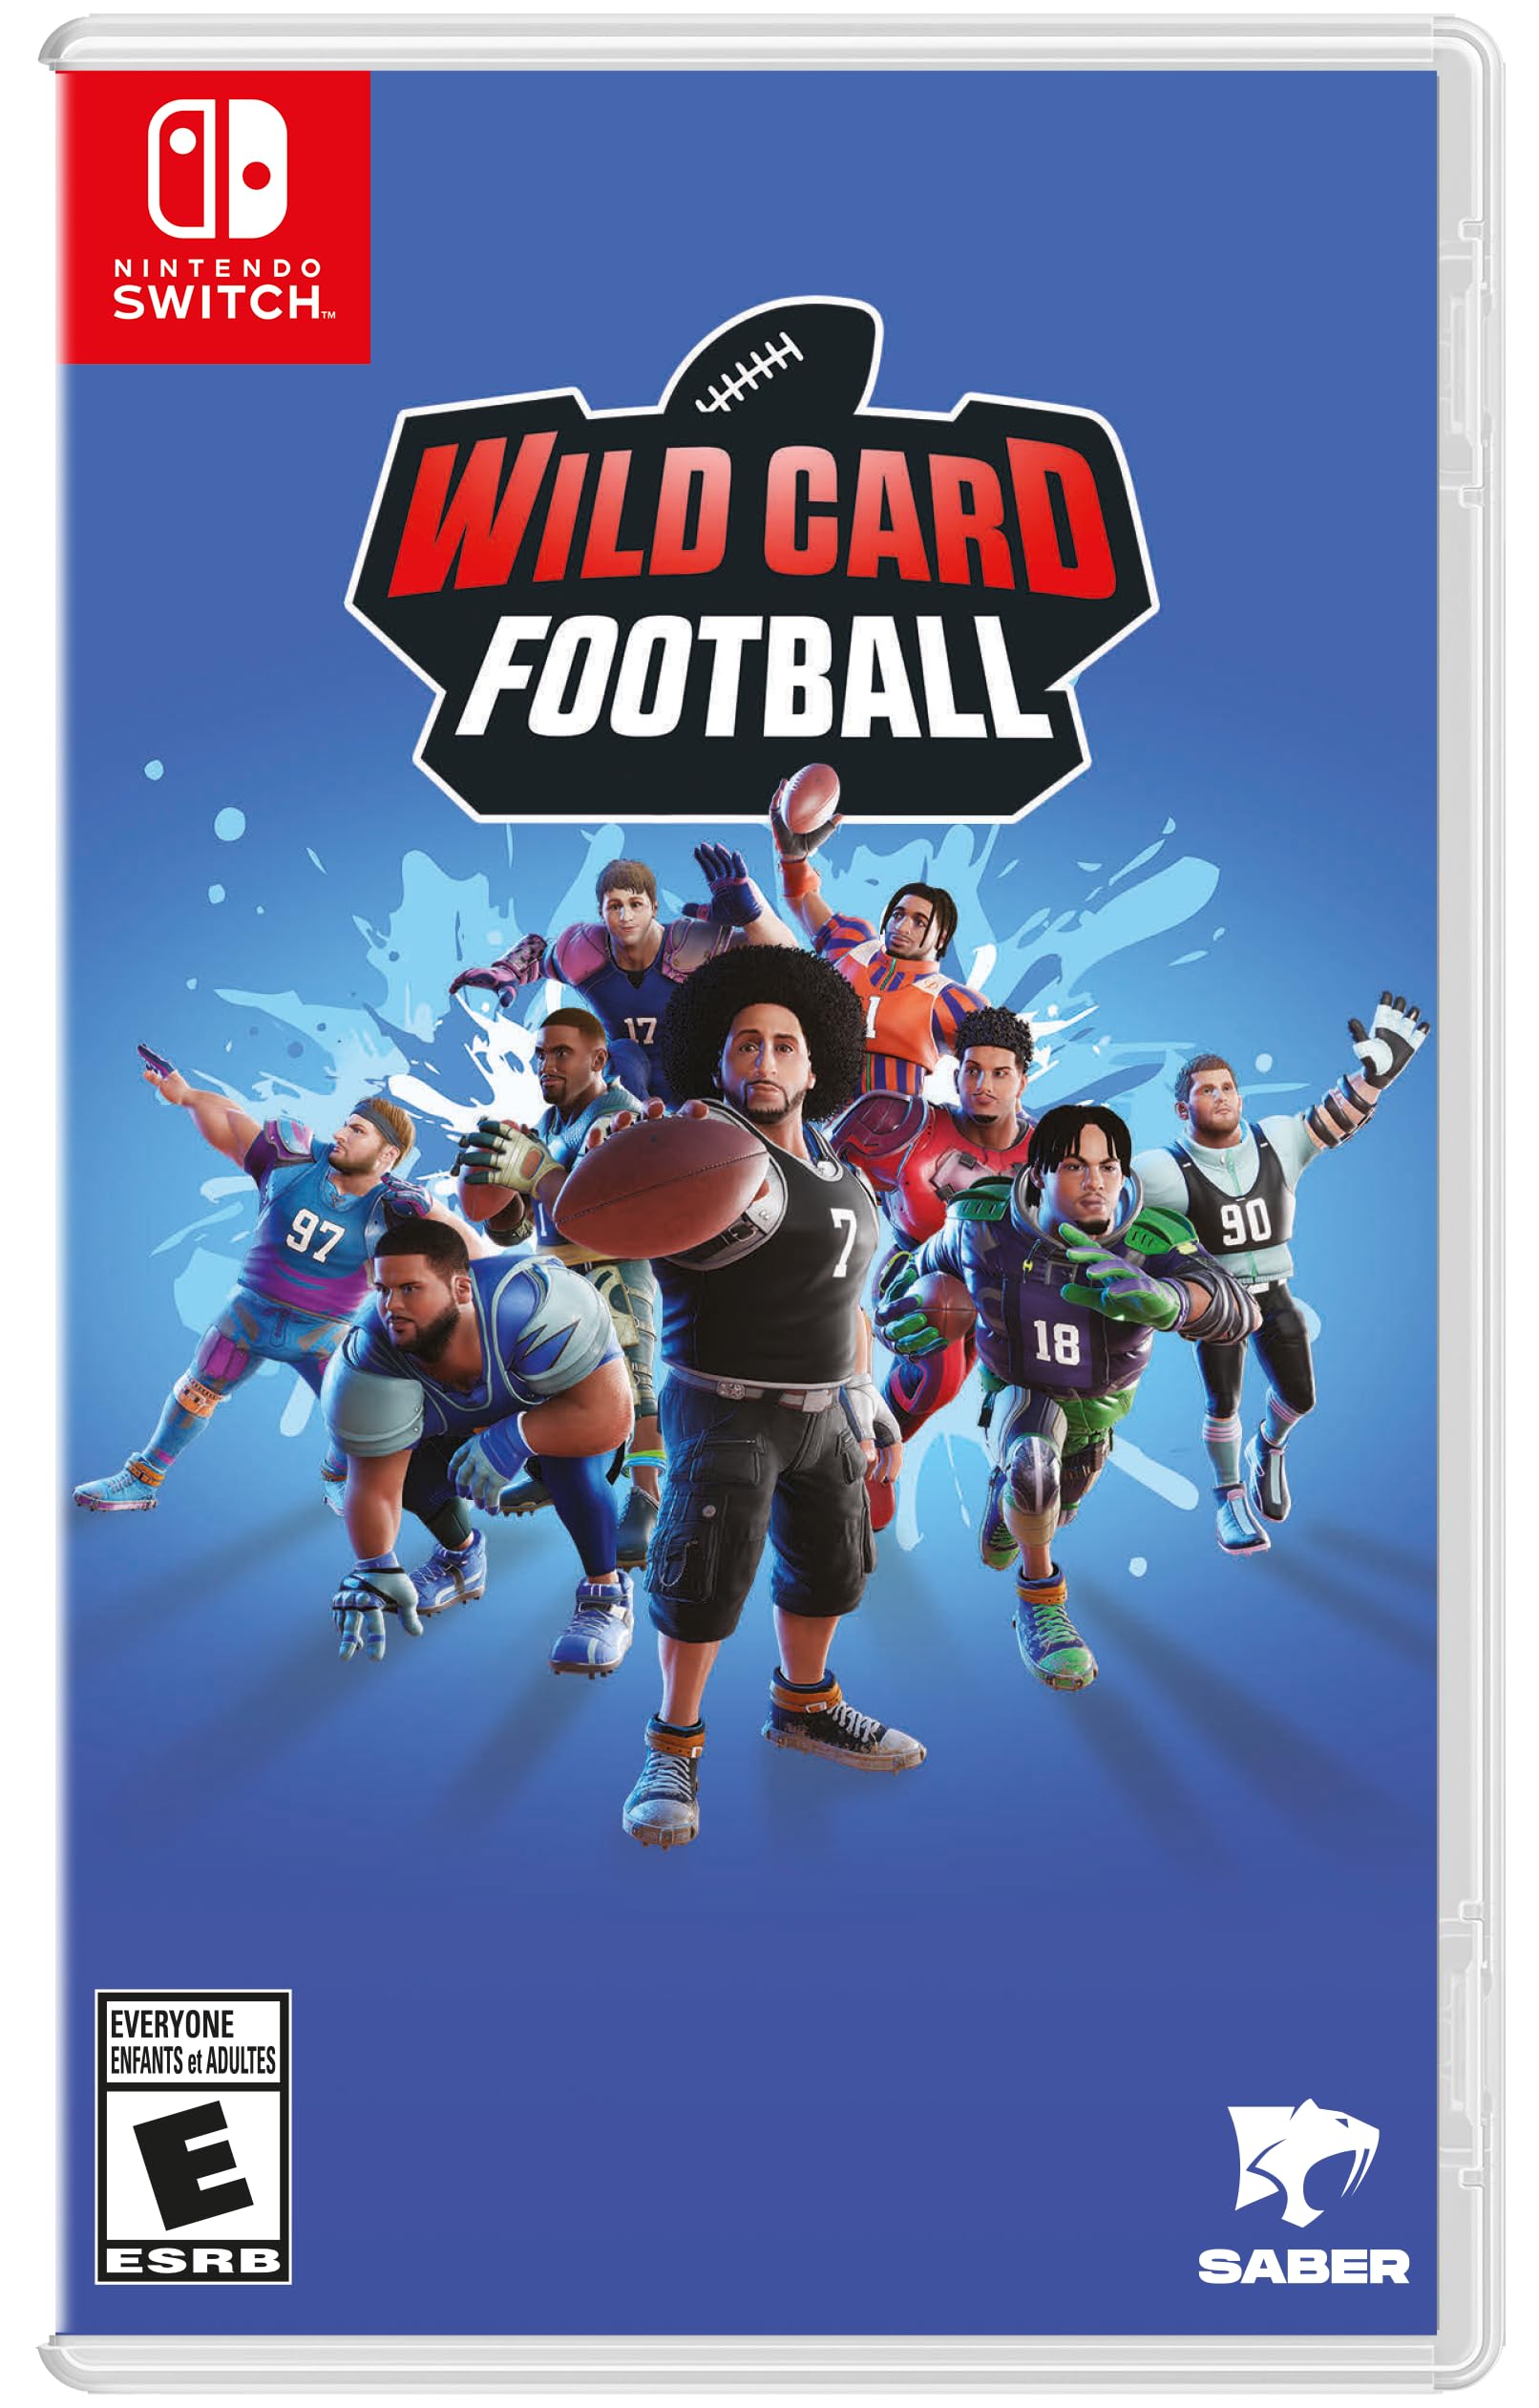 Wild Card Football (Nintendo Switch) $20 + Free Shipping w/ Prime or on orders over $35